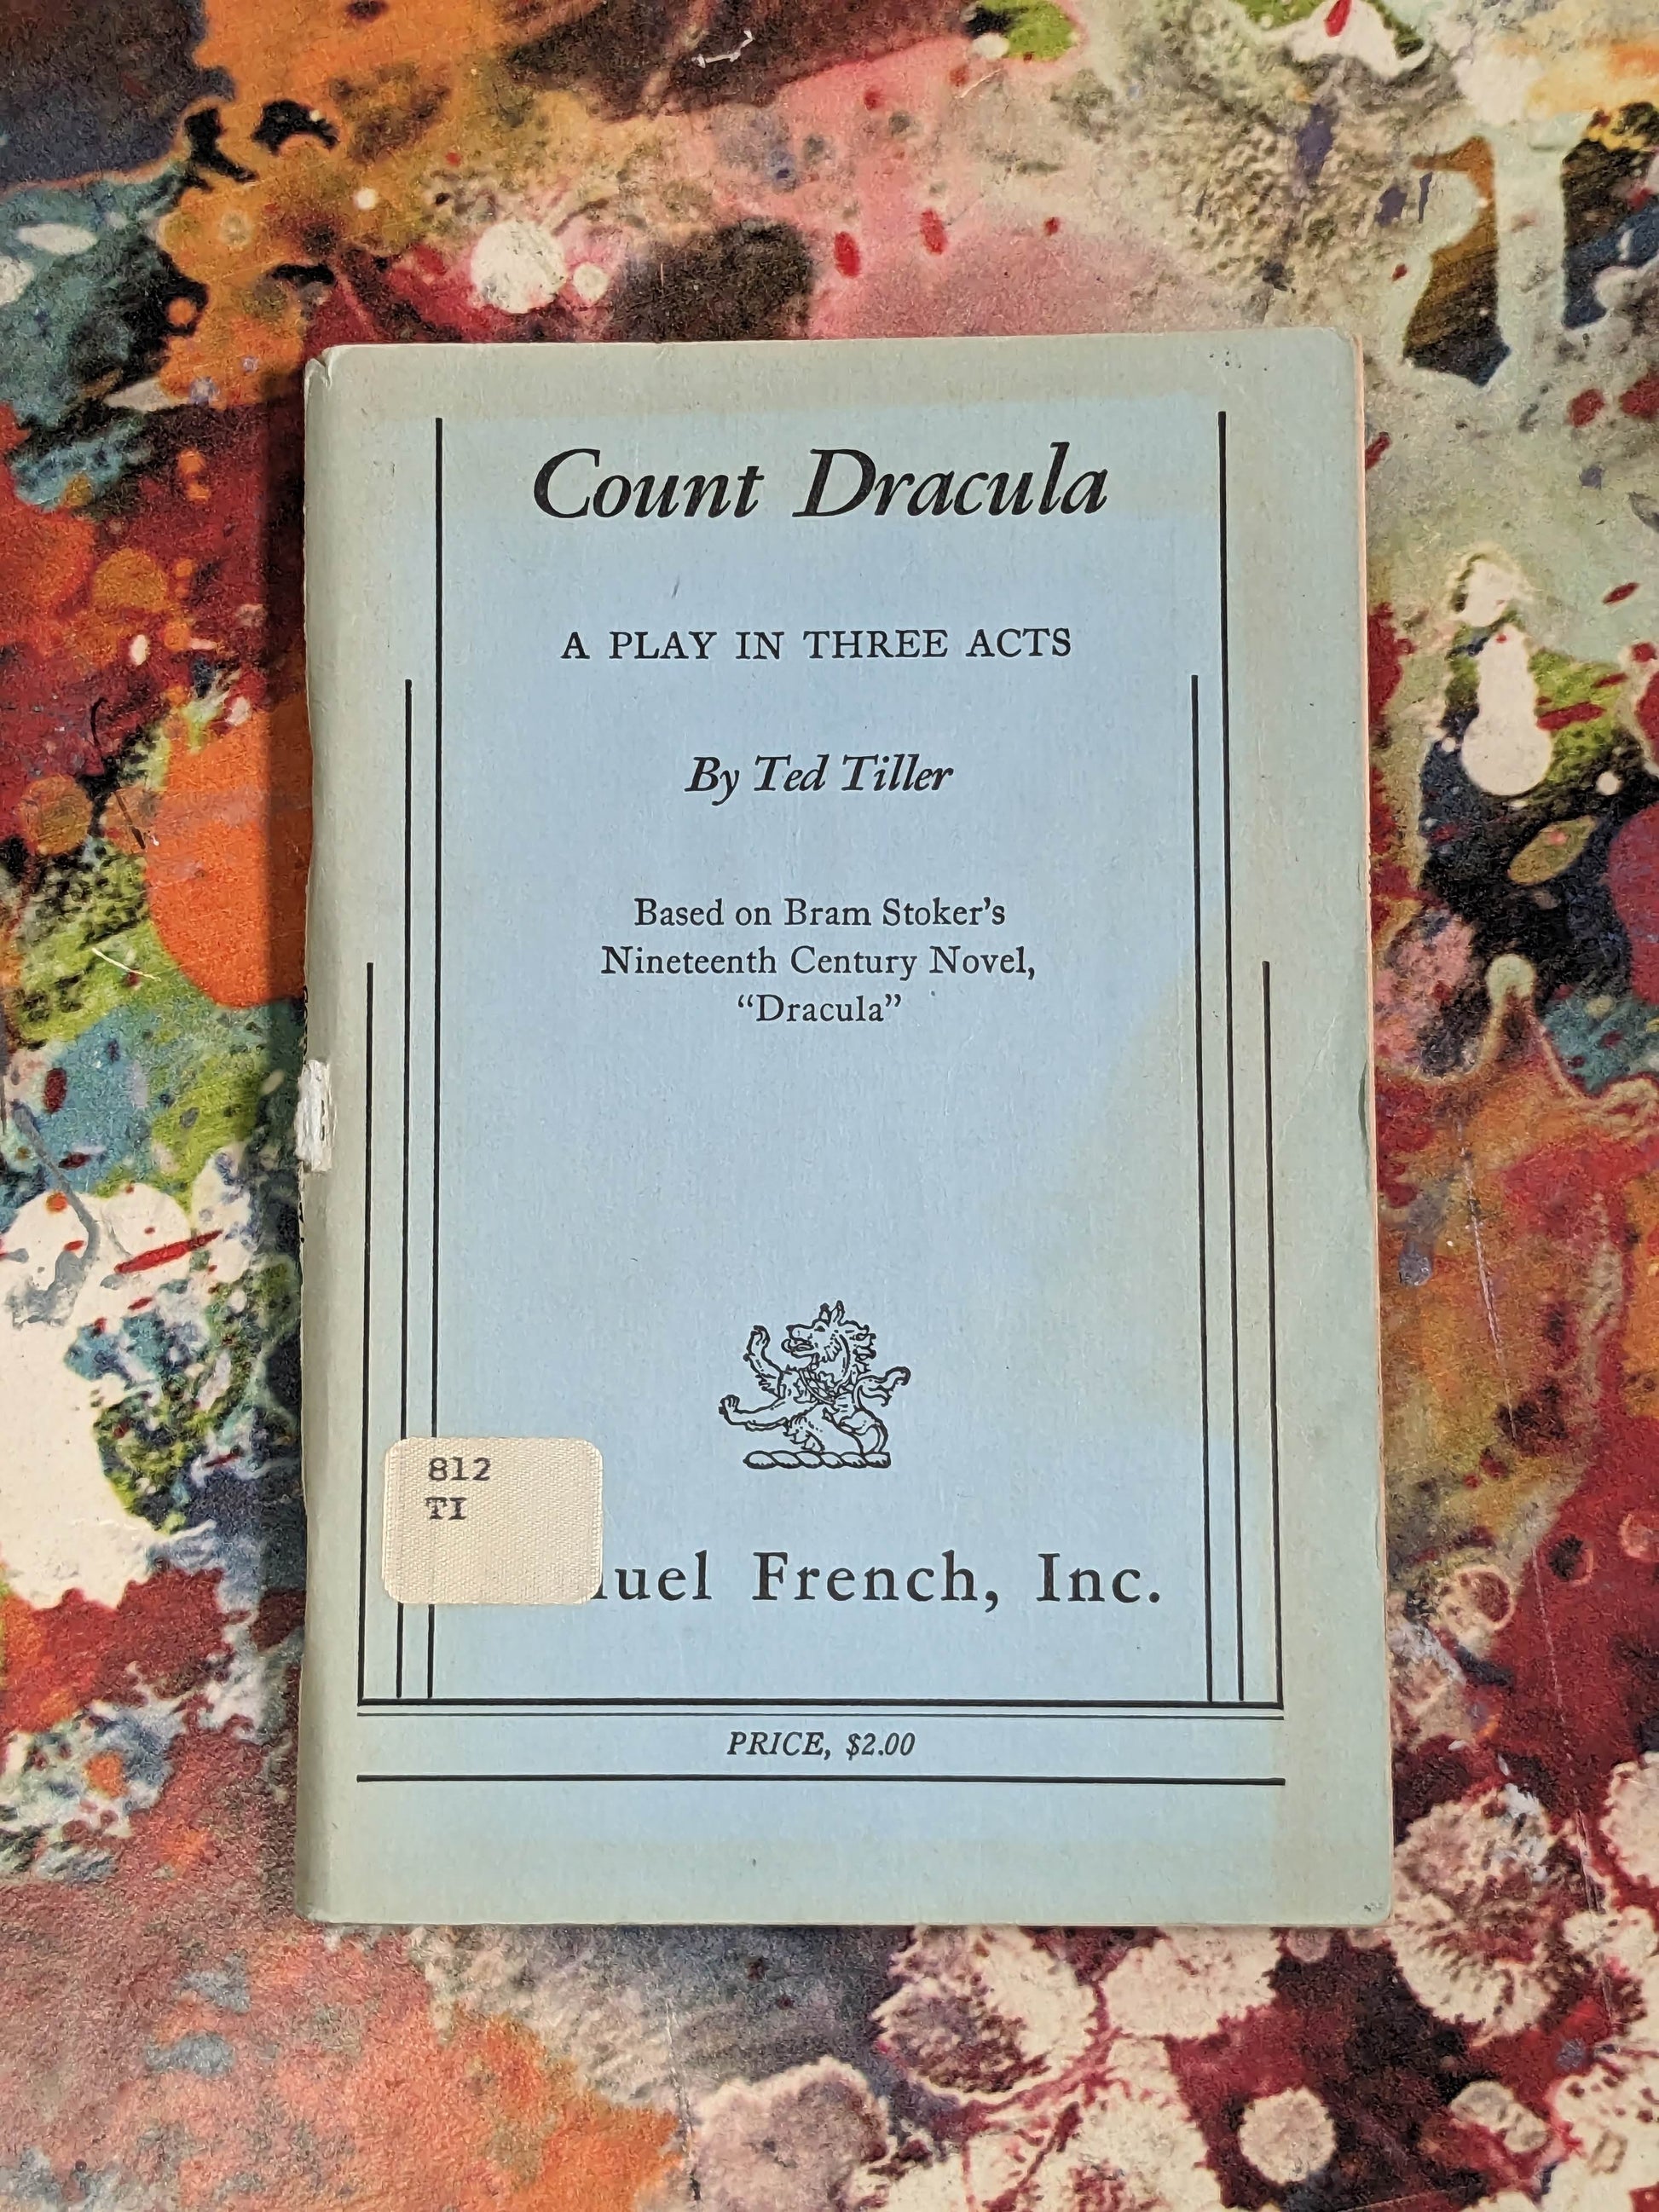 Count Dracula (Theatrical Play Script) by Ted Tiller - Asylum Books